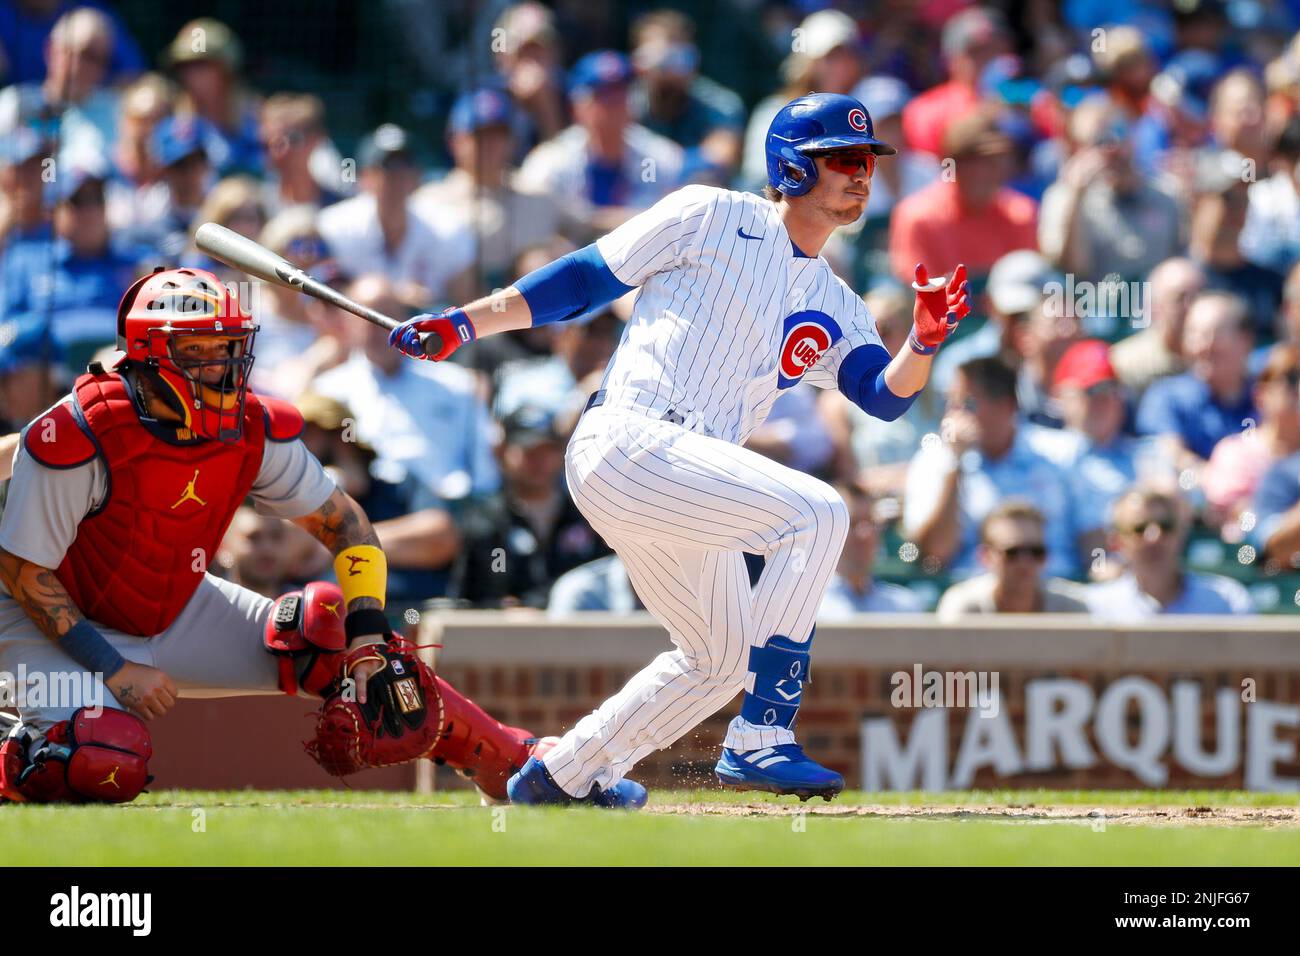 CHICAGO, IL - AUGUST 23: Chicago Cubs second basemen Zach McKinstry (6)  hits a single in the third inning during game 1 of a doubleheader between  the St. Louis Cardinals and Chicago